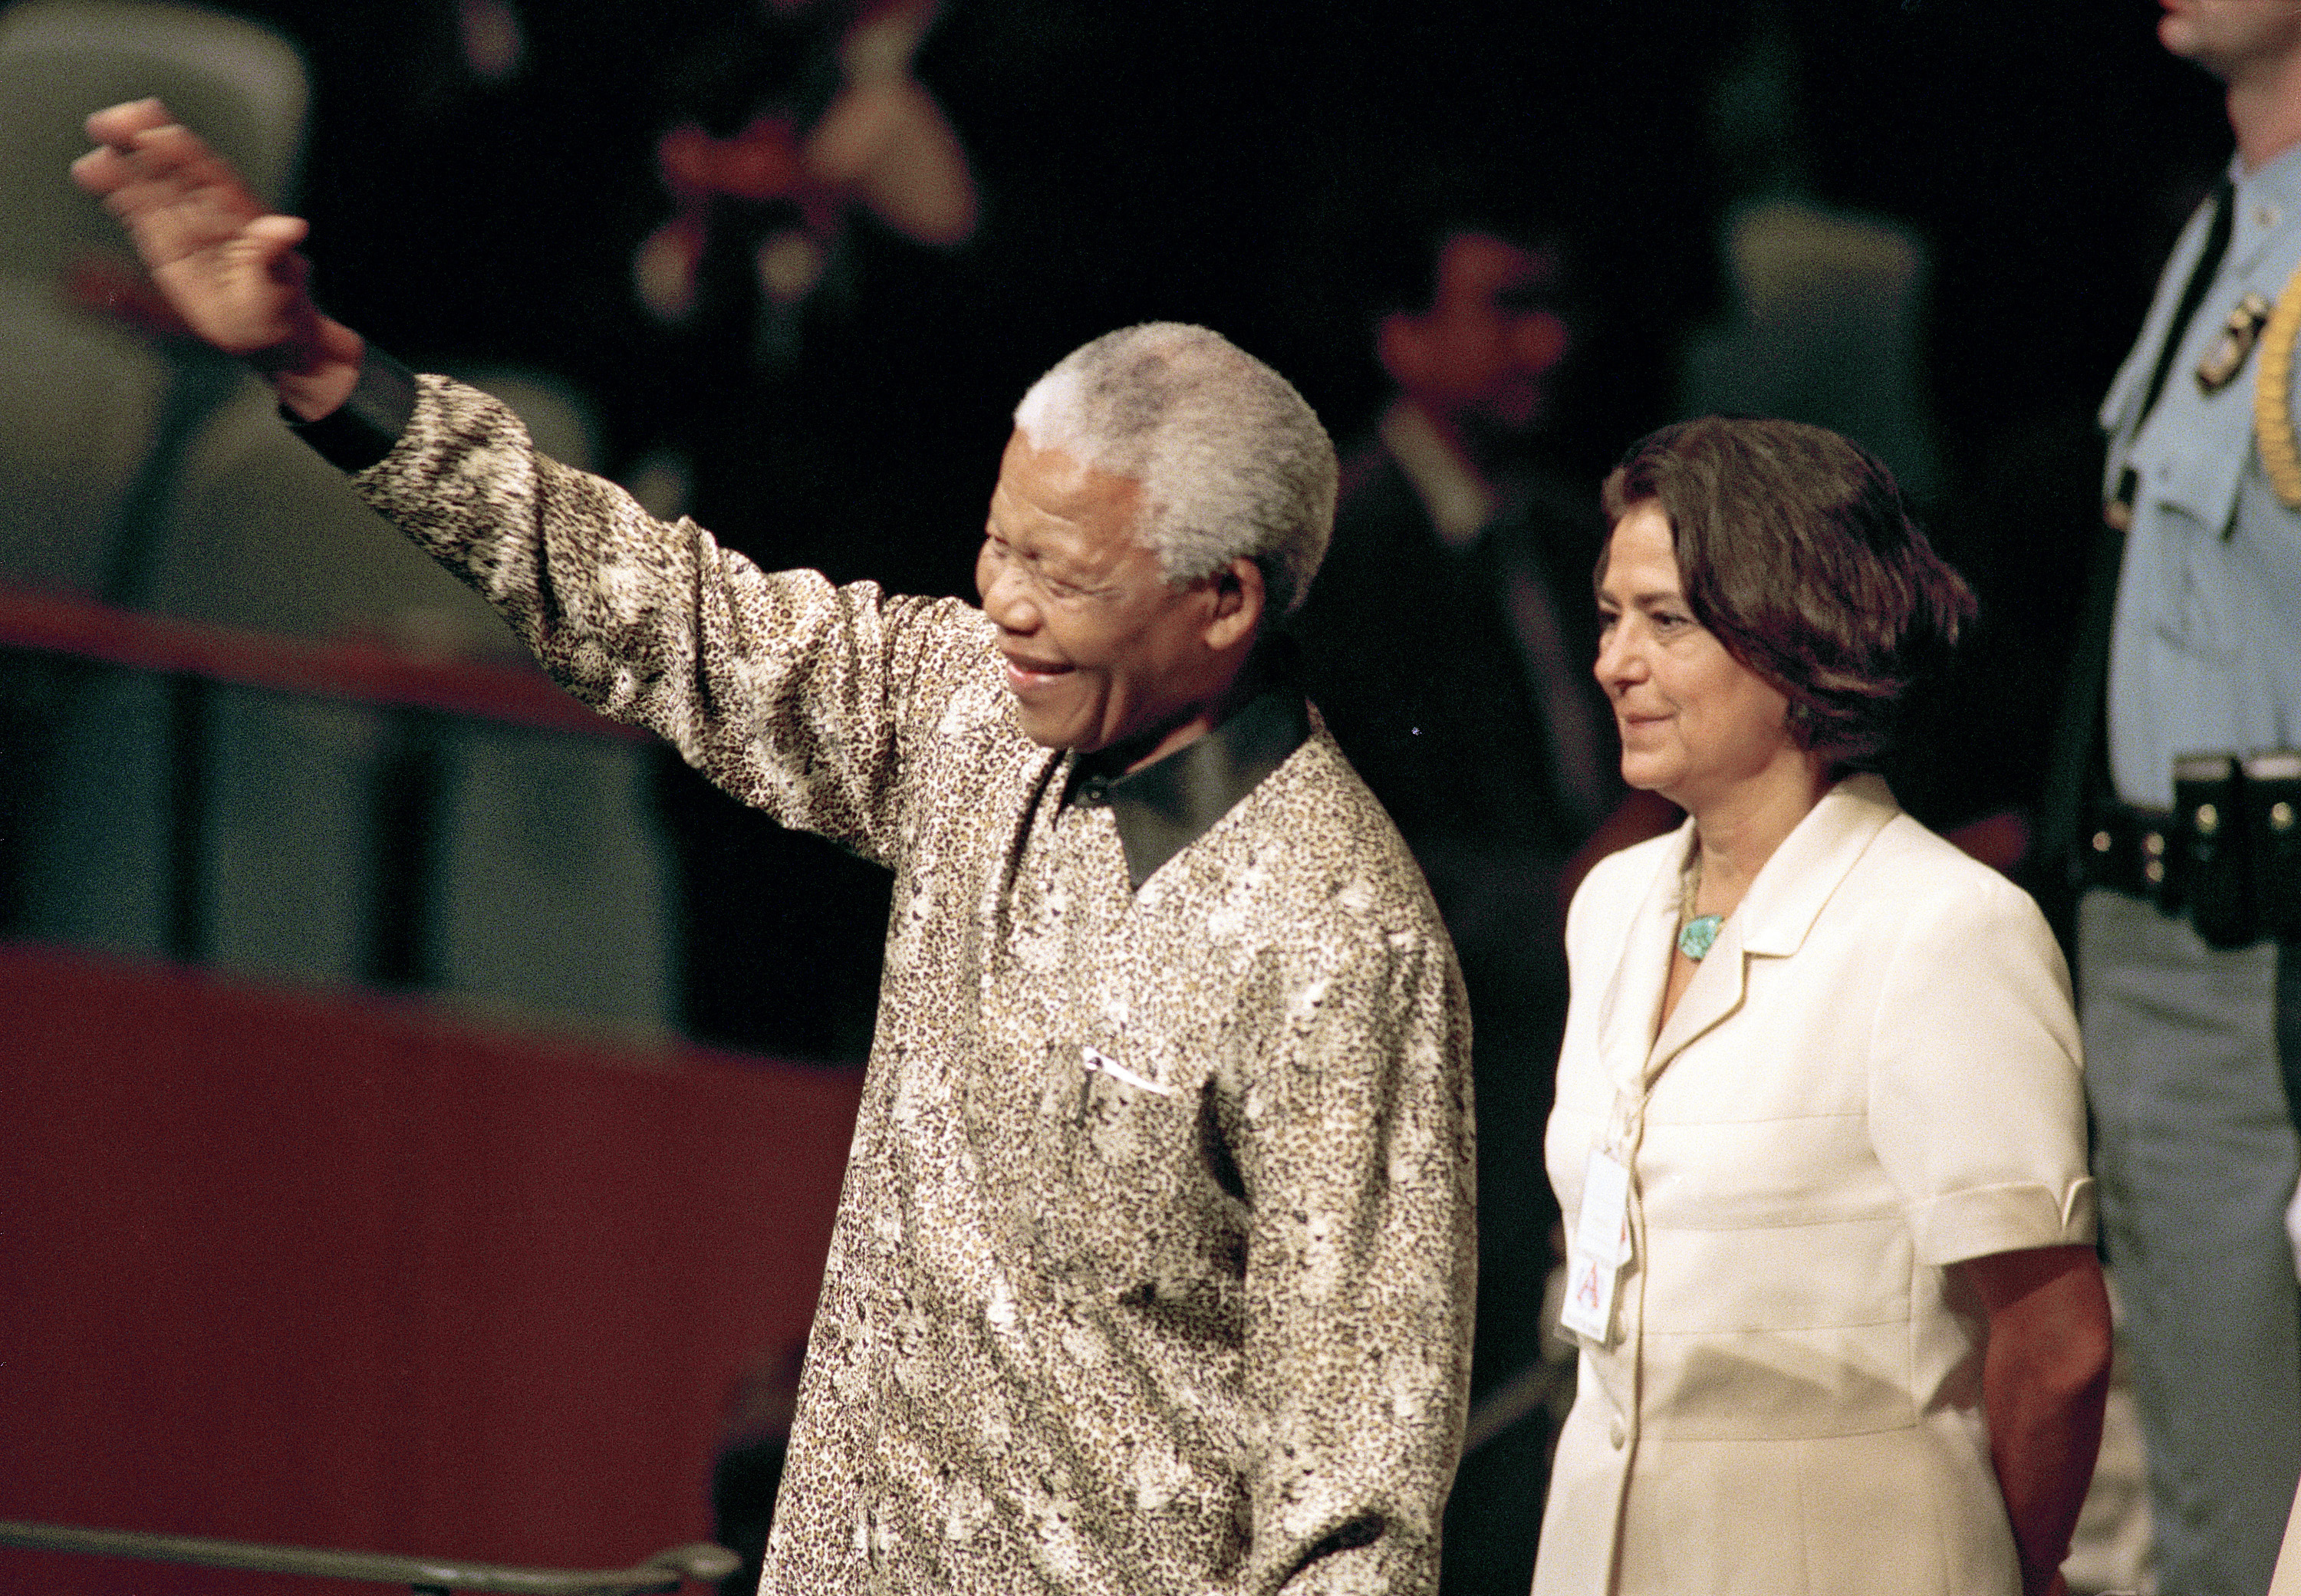 Nelson Mandela (left), President of South Africa, enters General Assembly Hall to address its fifty - third session on 21 September 1998. At his side is United Nations Chief of Protocol, Nadia Younes. - UN Photo/Evan Schneider.